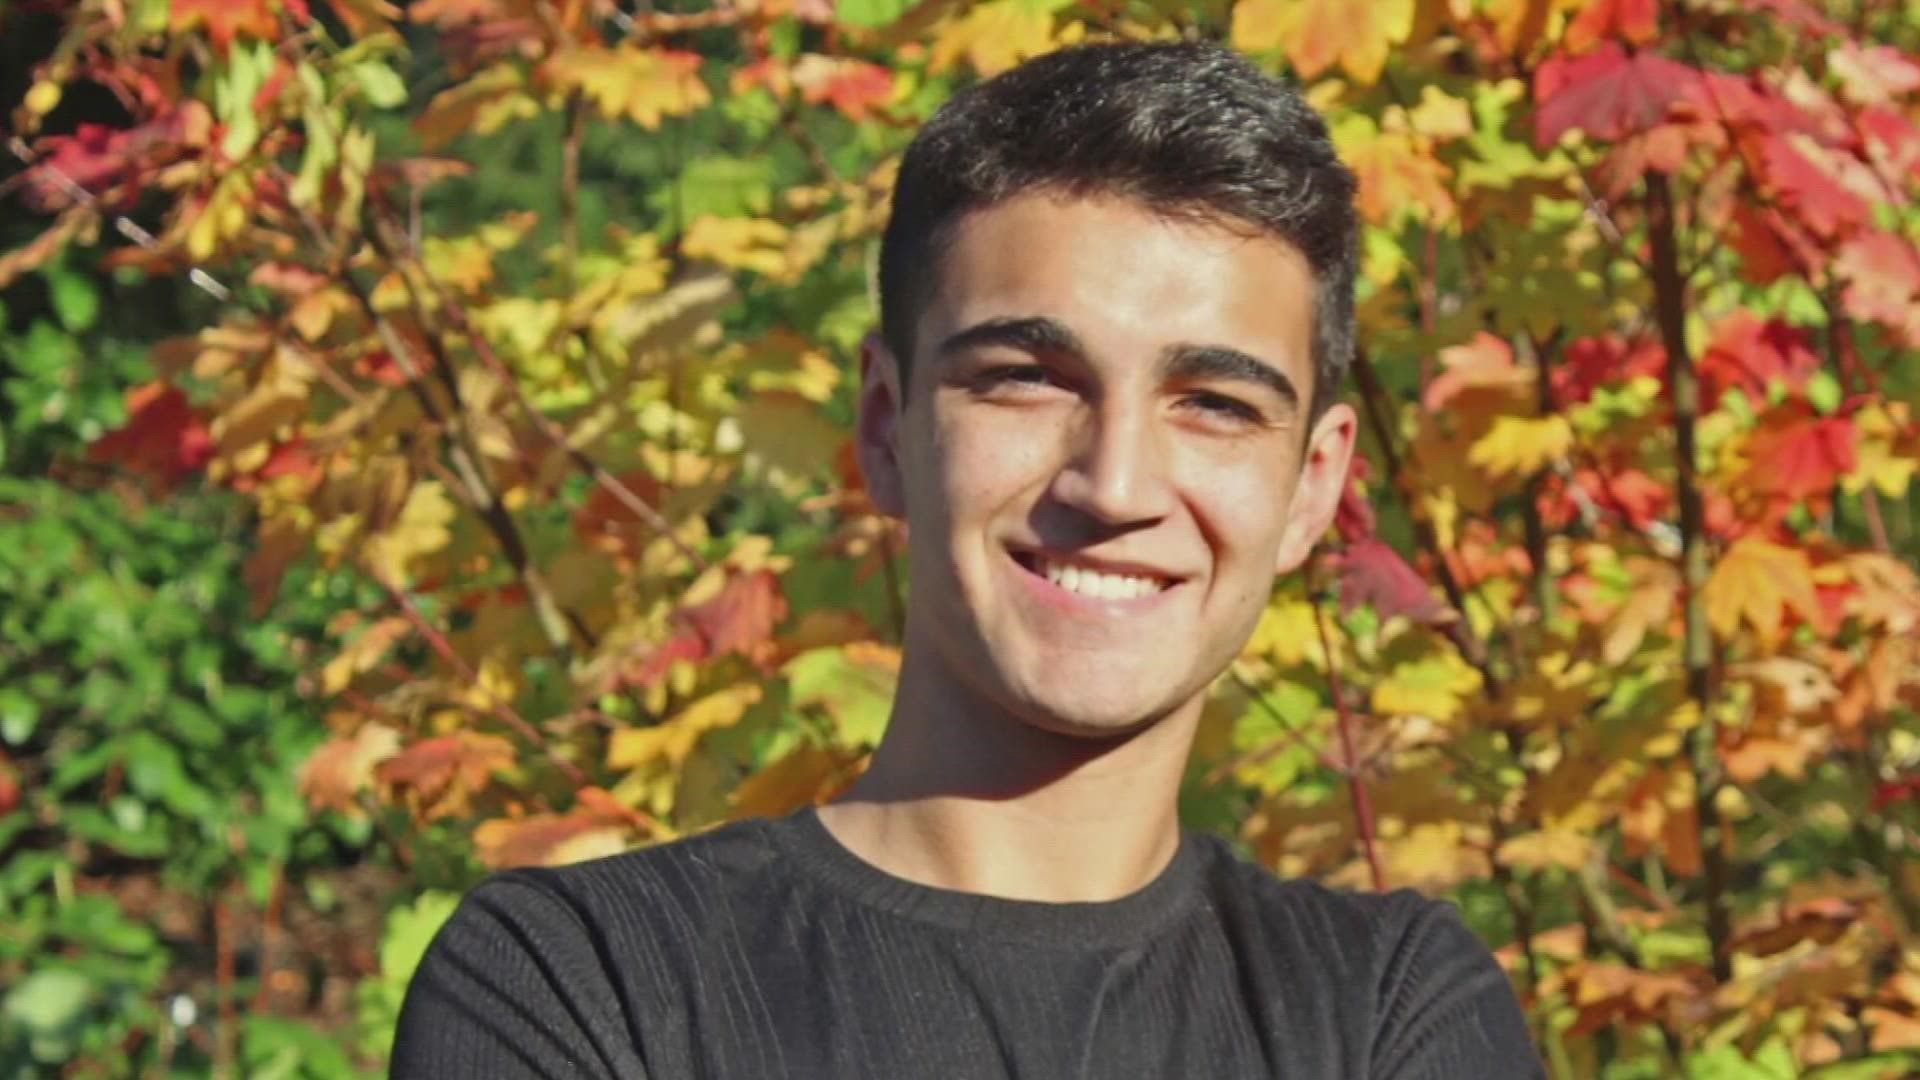 The bill is named after a WSU student who died following a hazing incident in 2019.